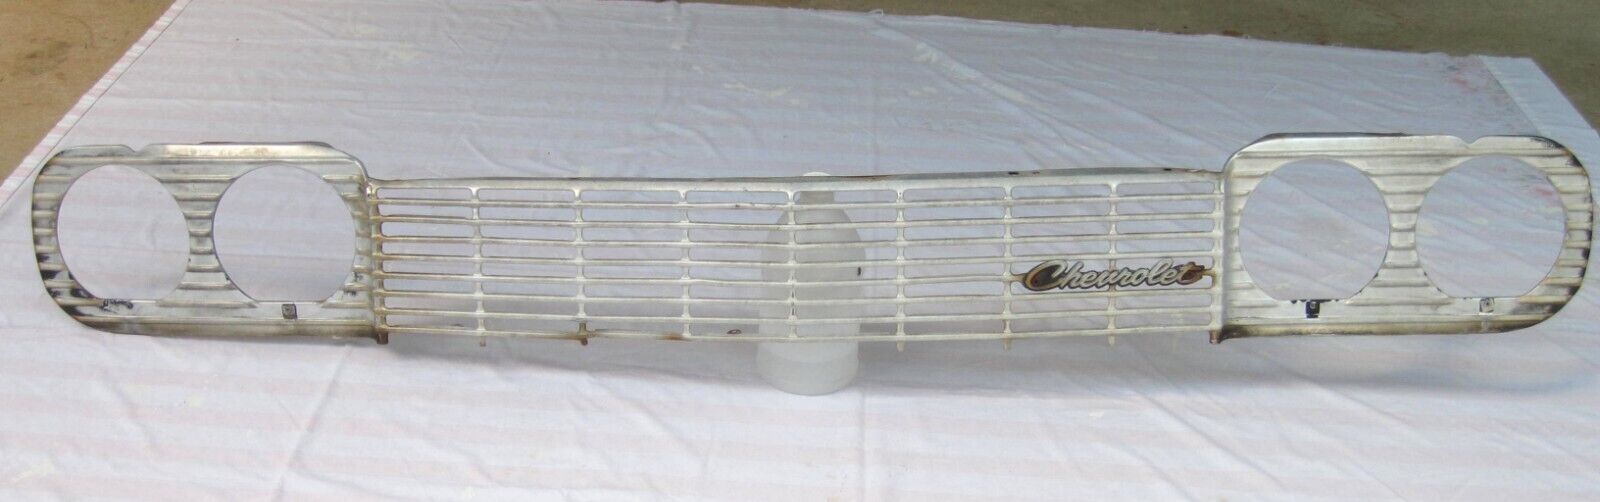 1964 Chevrolet impala grill chevy 64 biscayne bel air - $237.60